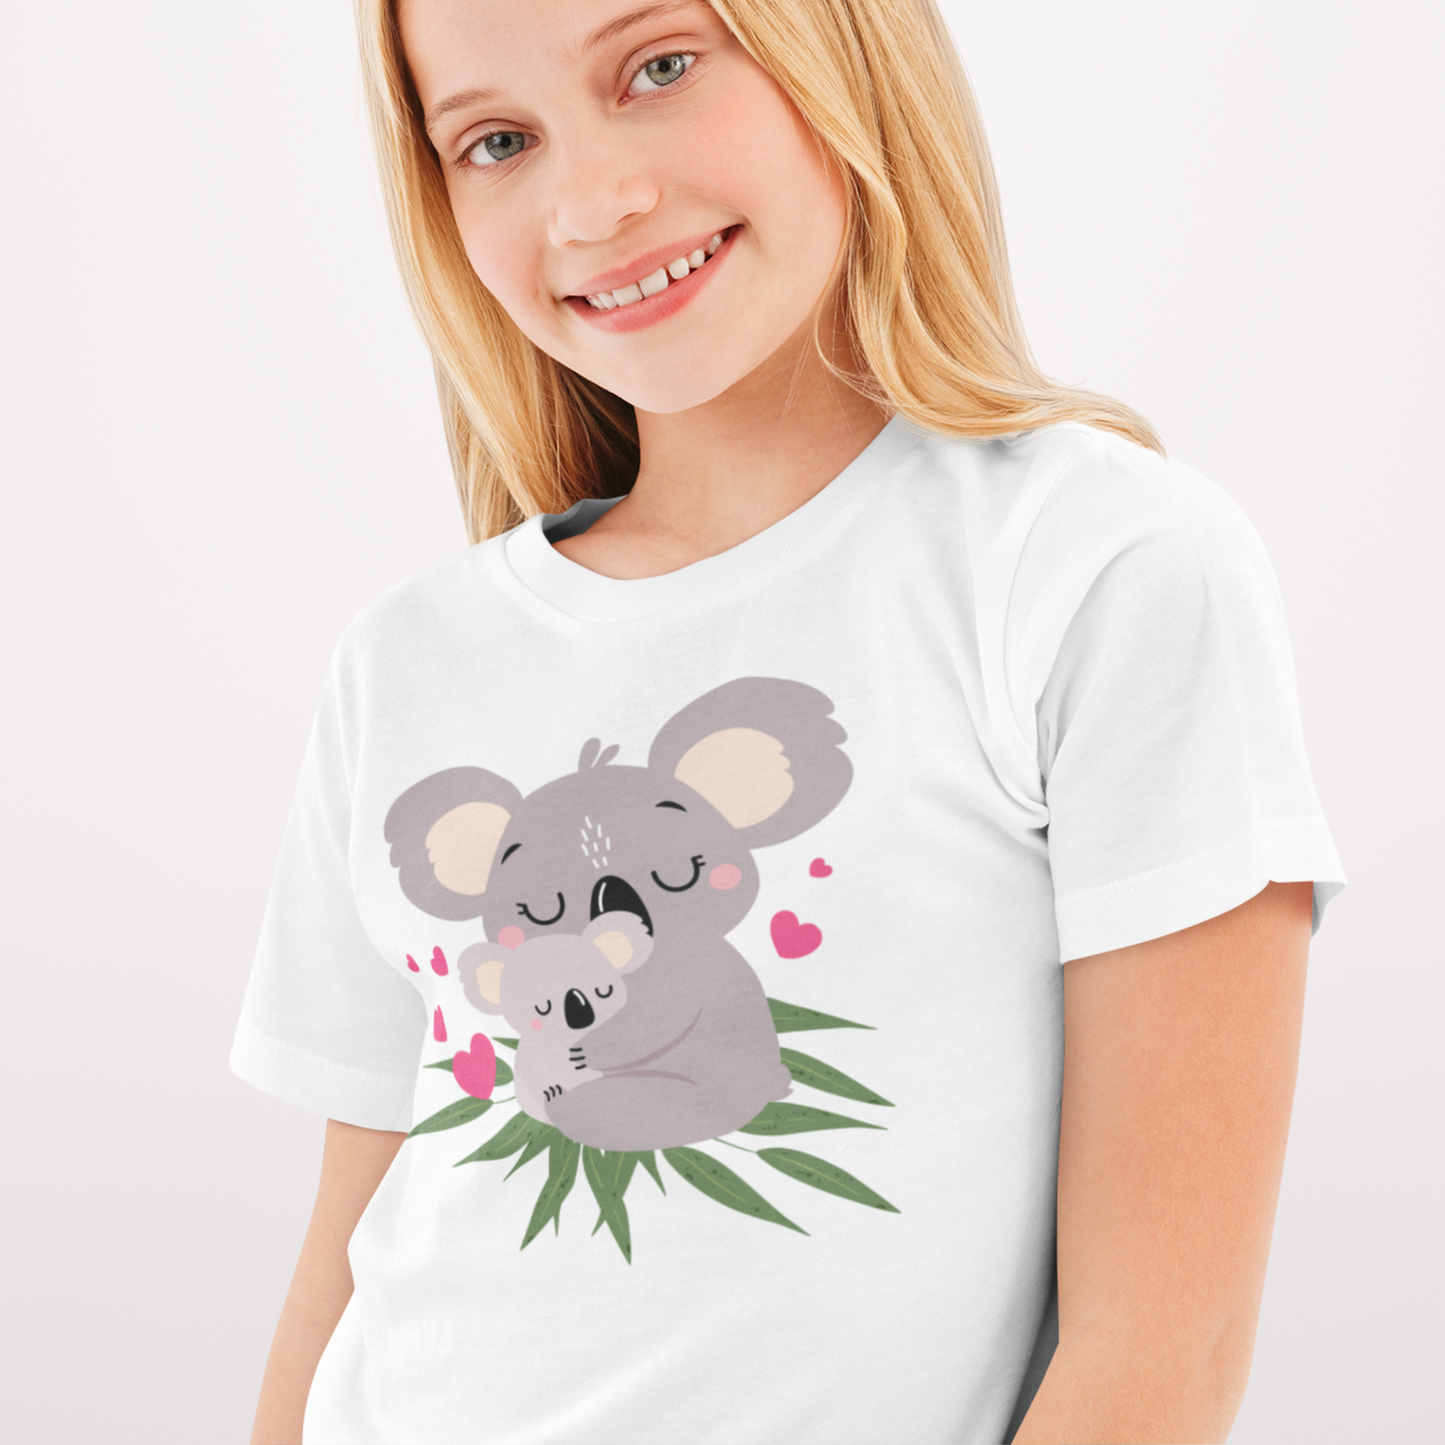 Young girl wearing a white t-shirt with printed Koala design